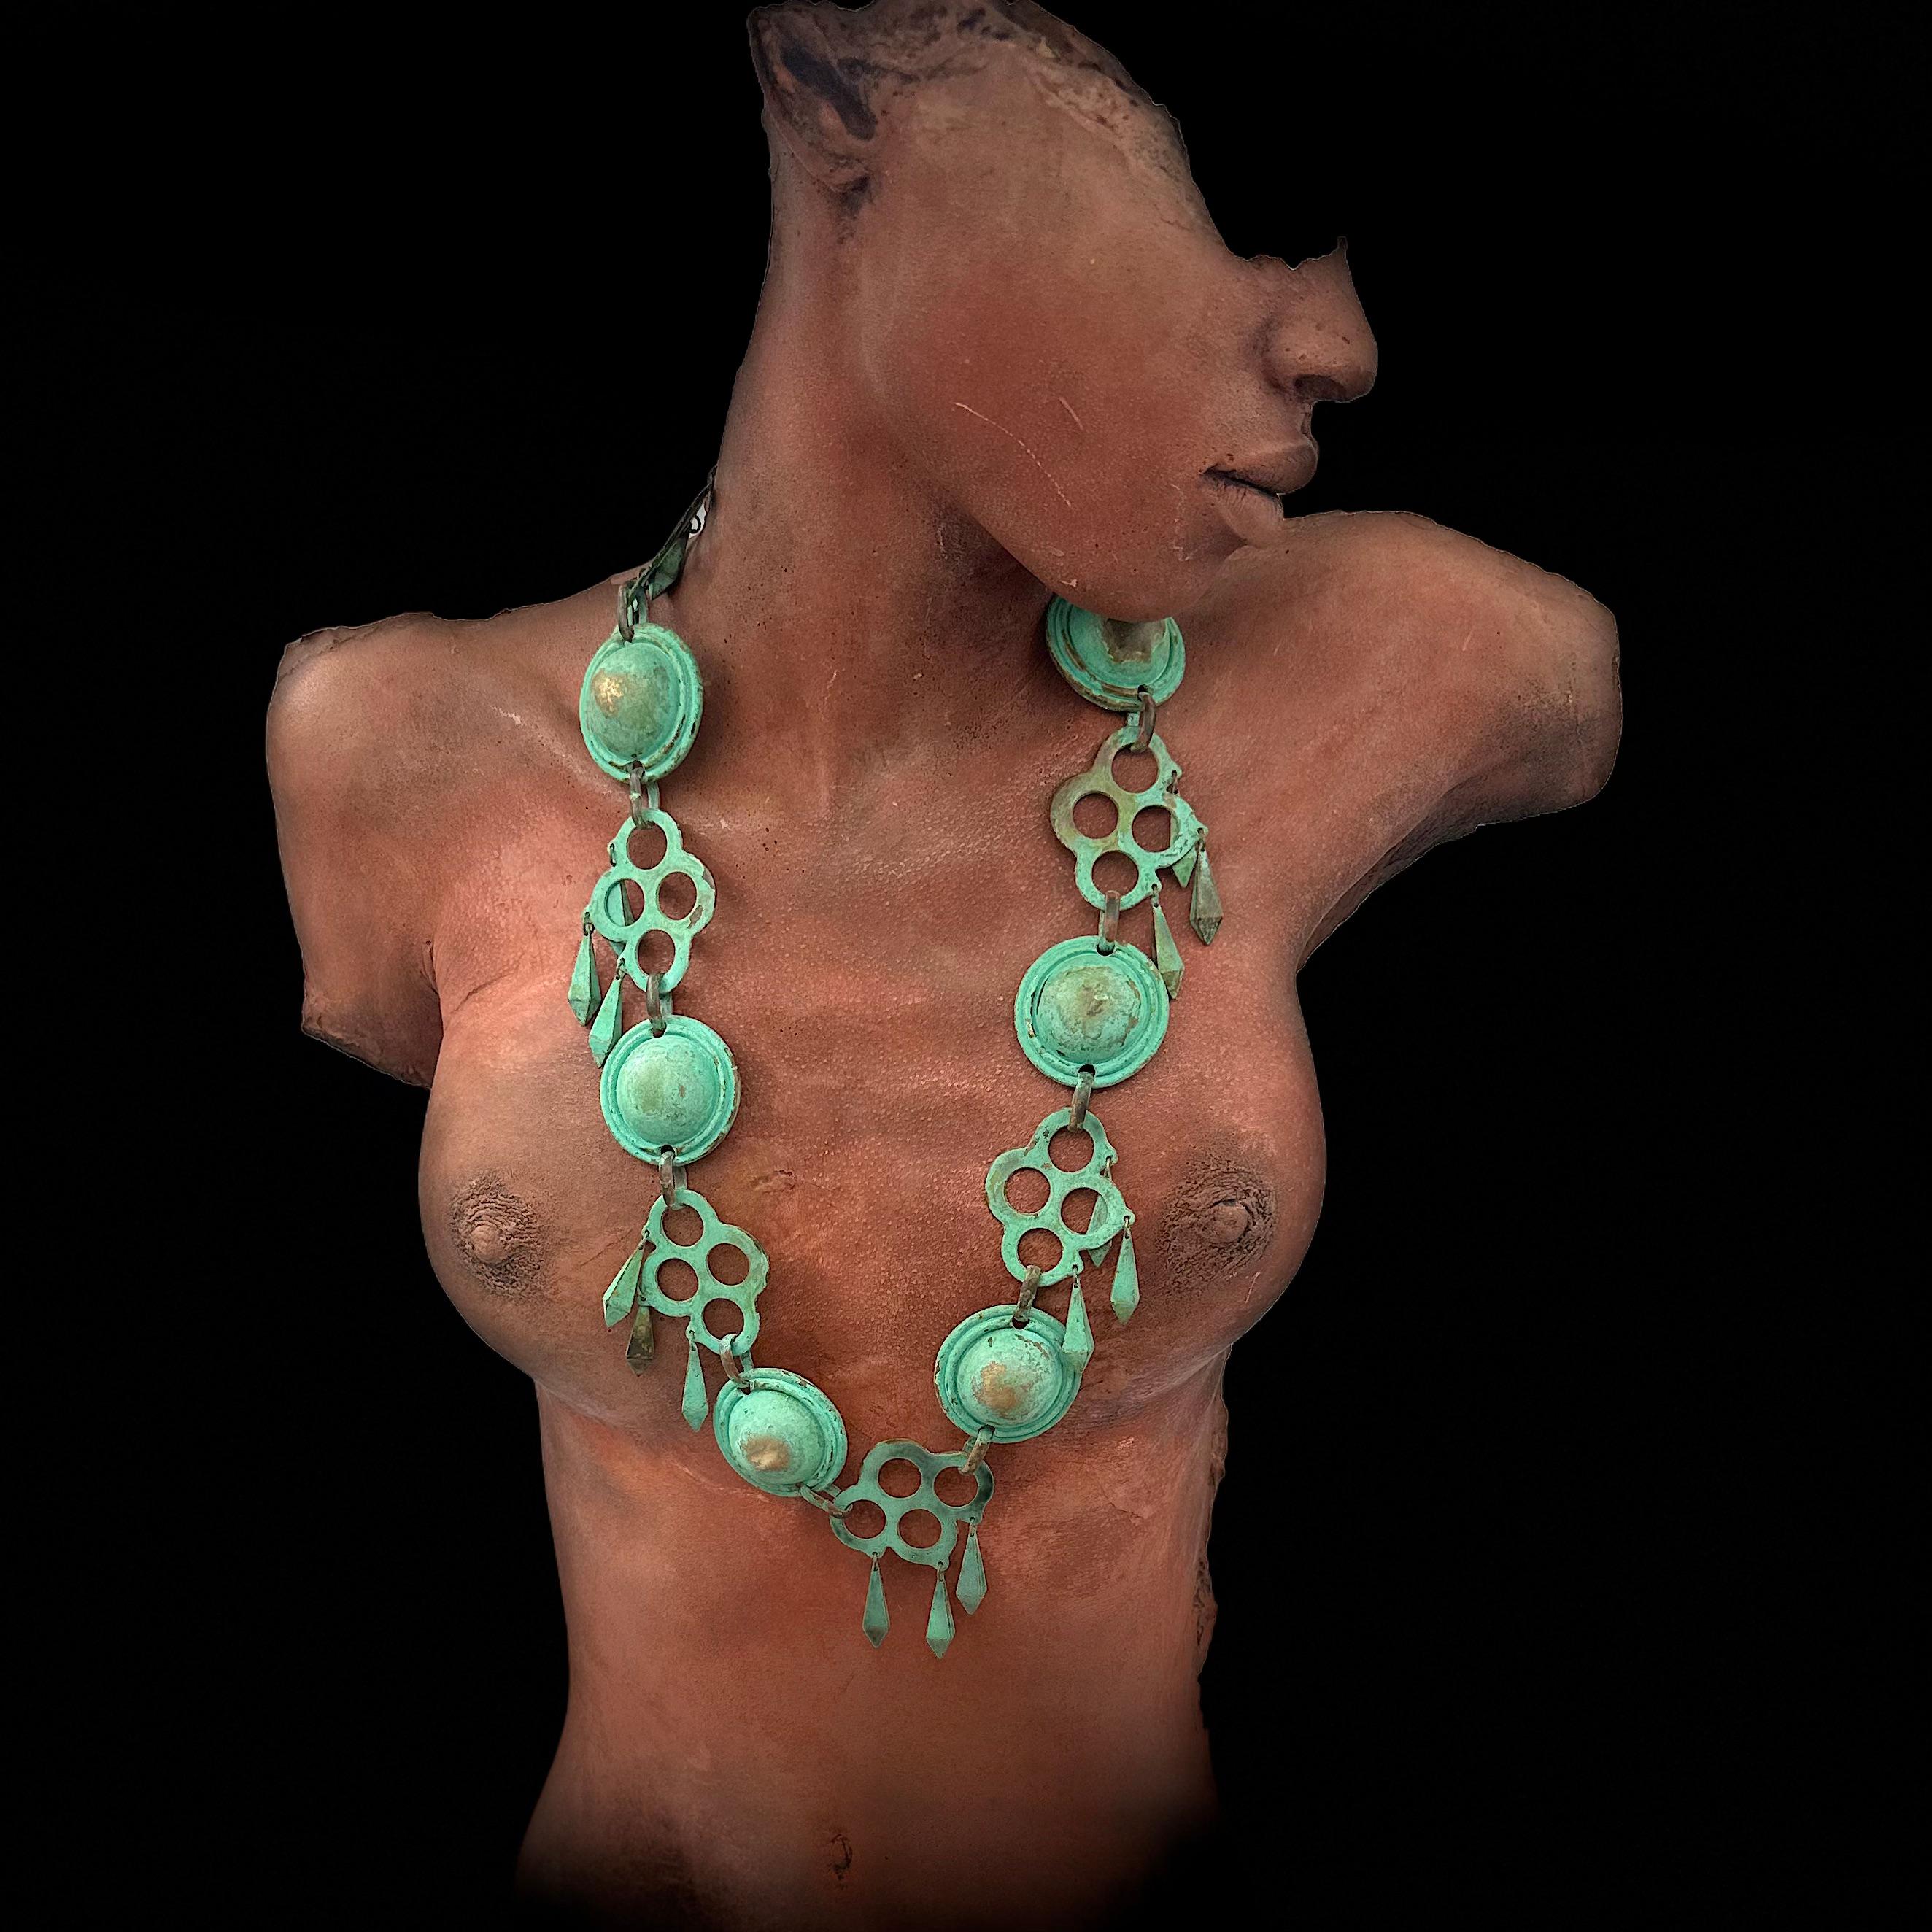 Robert Lee Morris Verdigris Avalon Belt/Necklace made in 1983. This design was part of a bigger collection that was entitled Avalon, and inspired by the book by Marian Bradley Zimmer, 